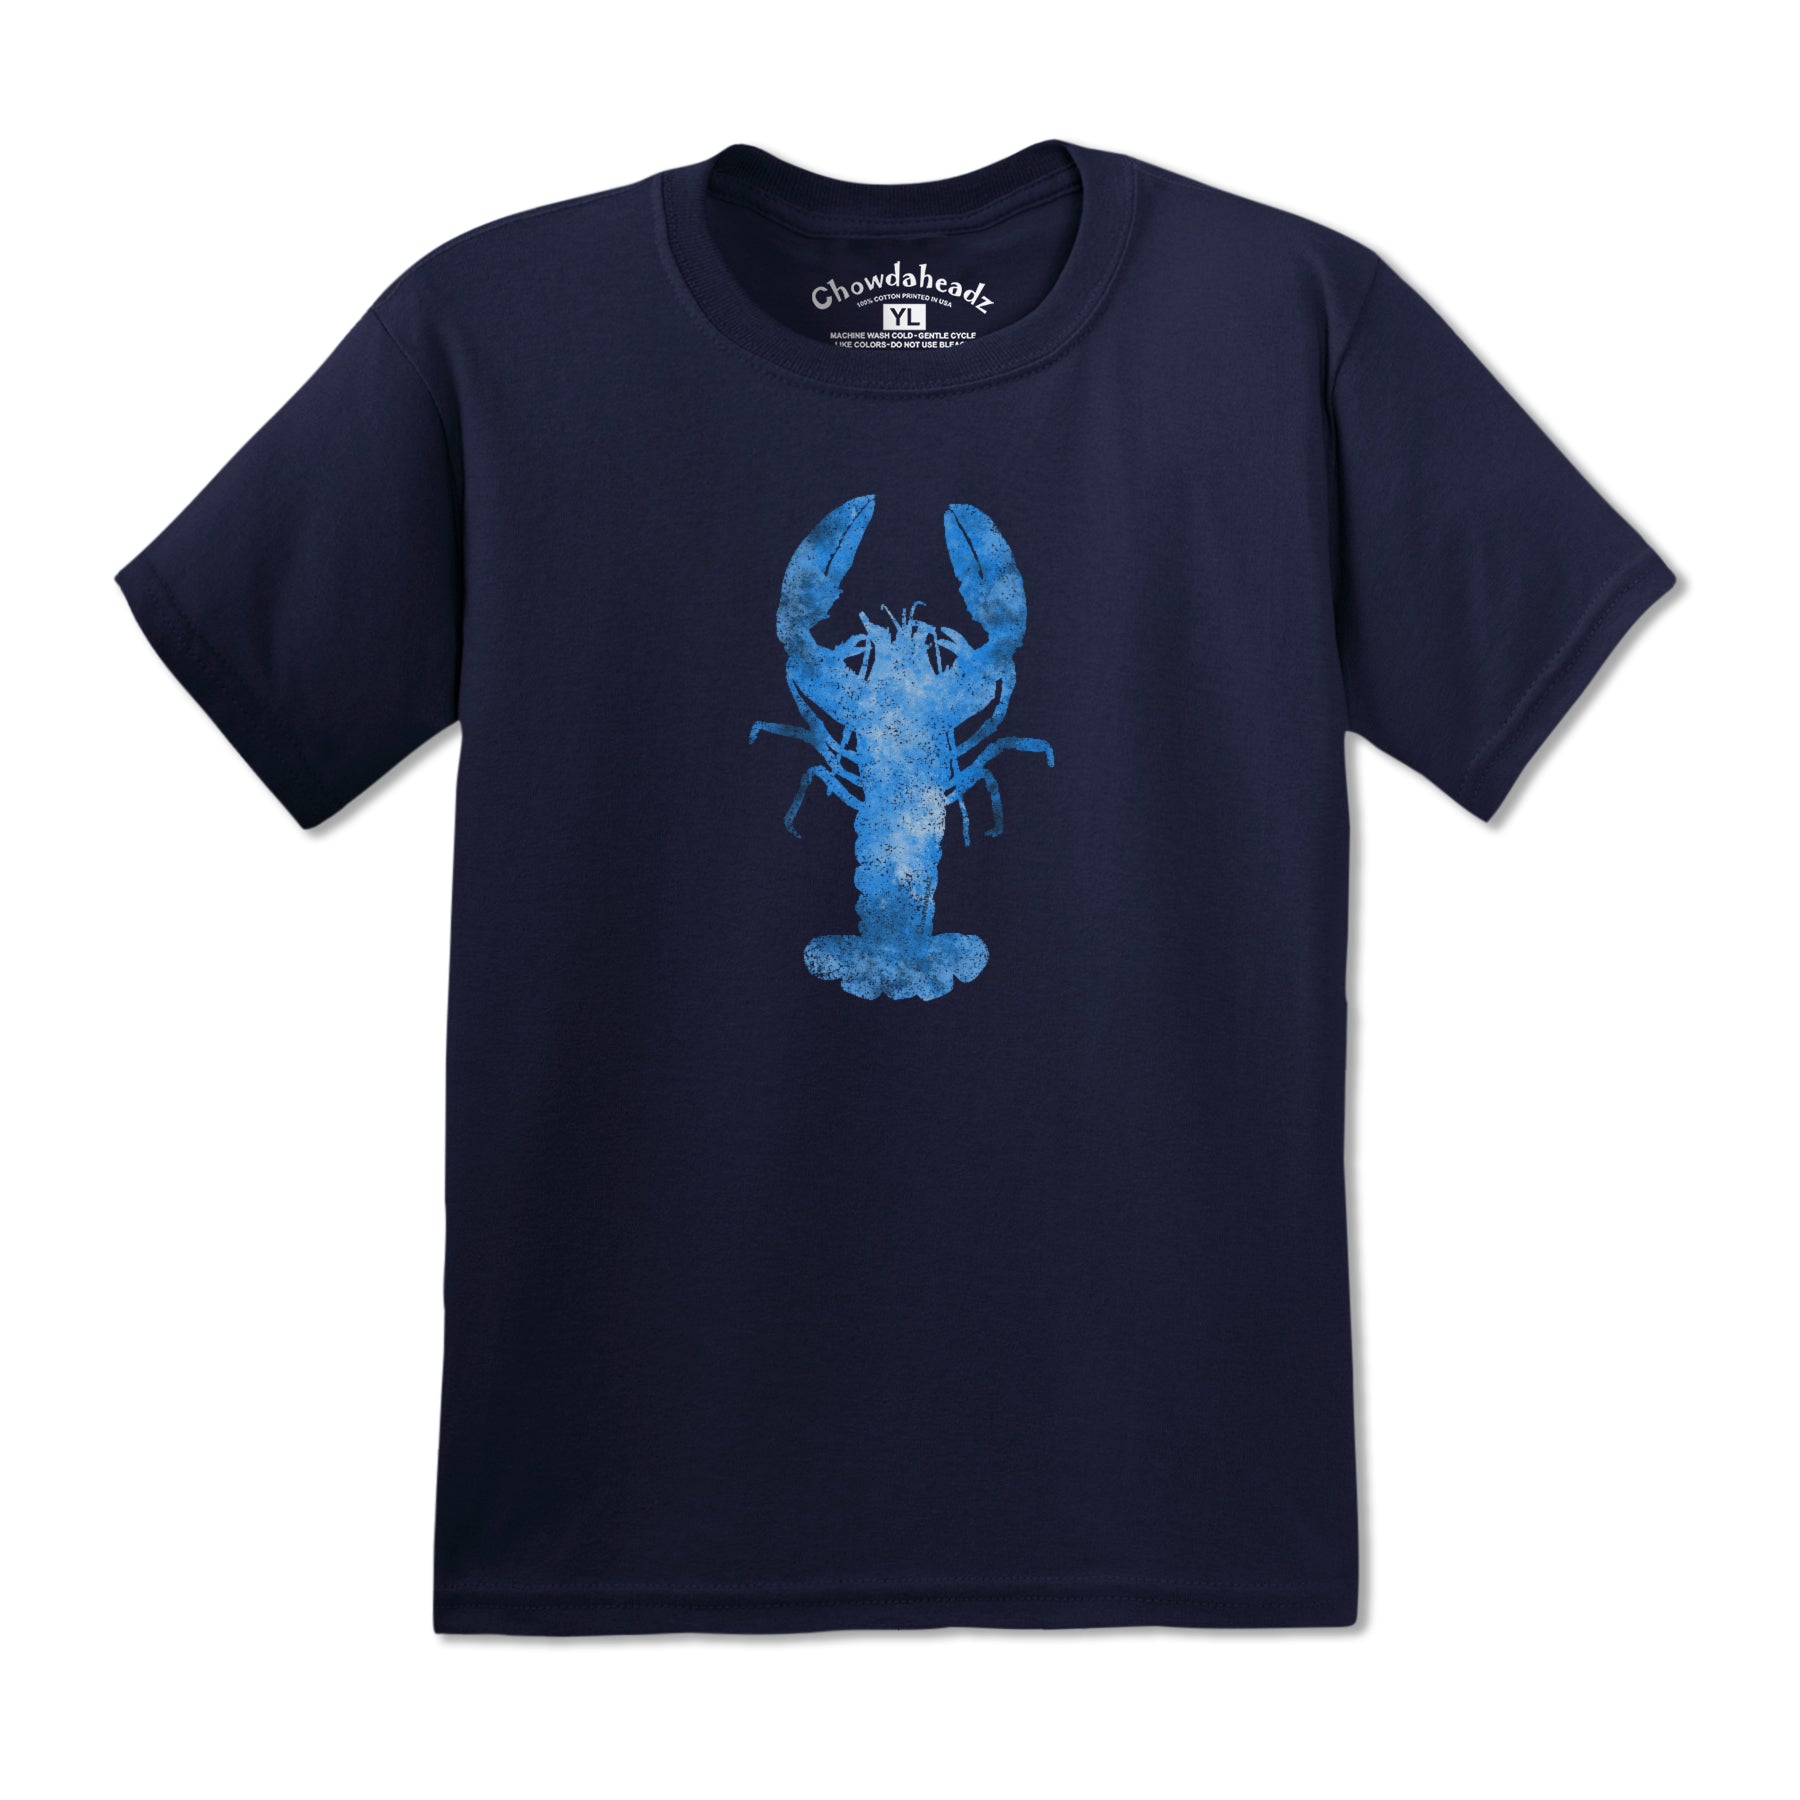 Blue Lobster Watercolor Youth T-Shirt - Chowdaheadz